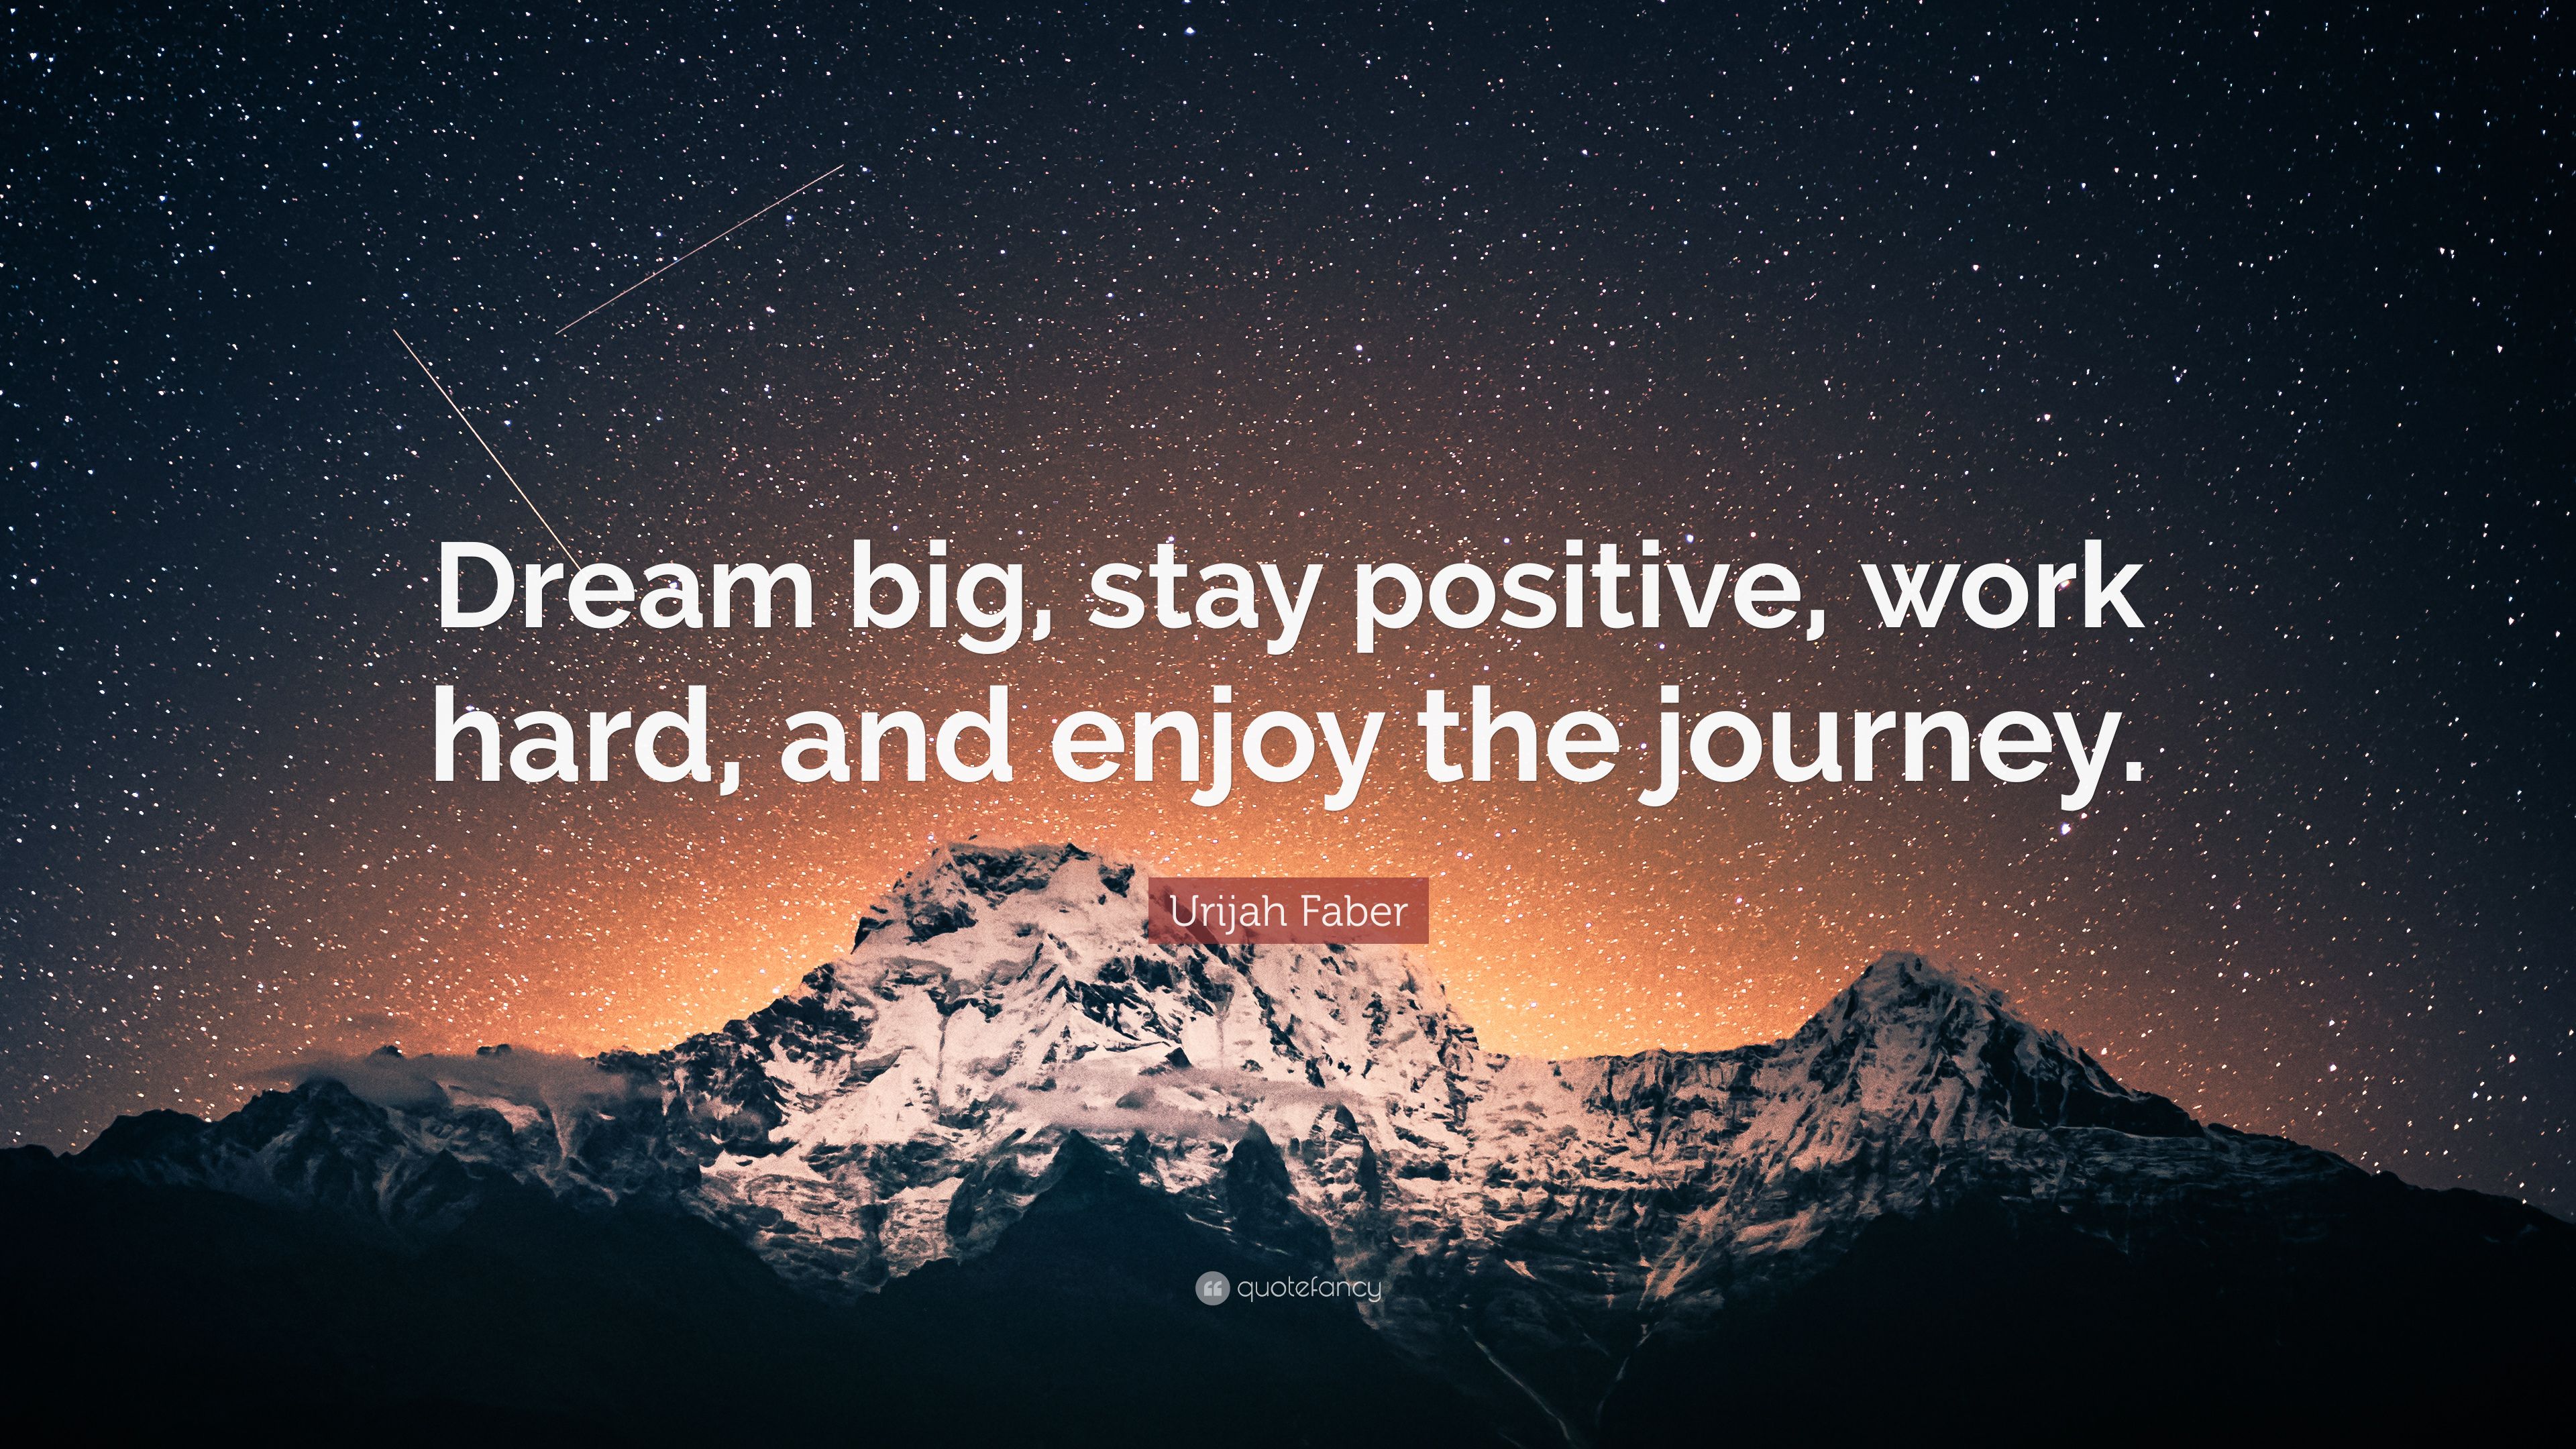 Urijah Faber Quote: “Dream big, stay positive, work hard, and enjoy the journey.” (28 wallpaper)